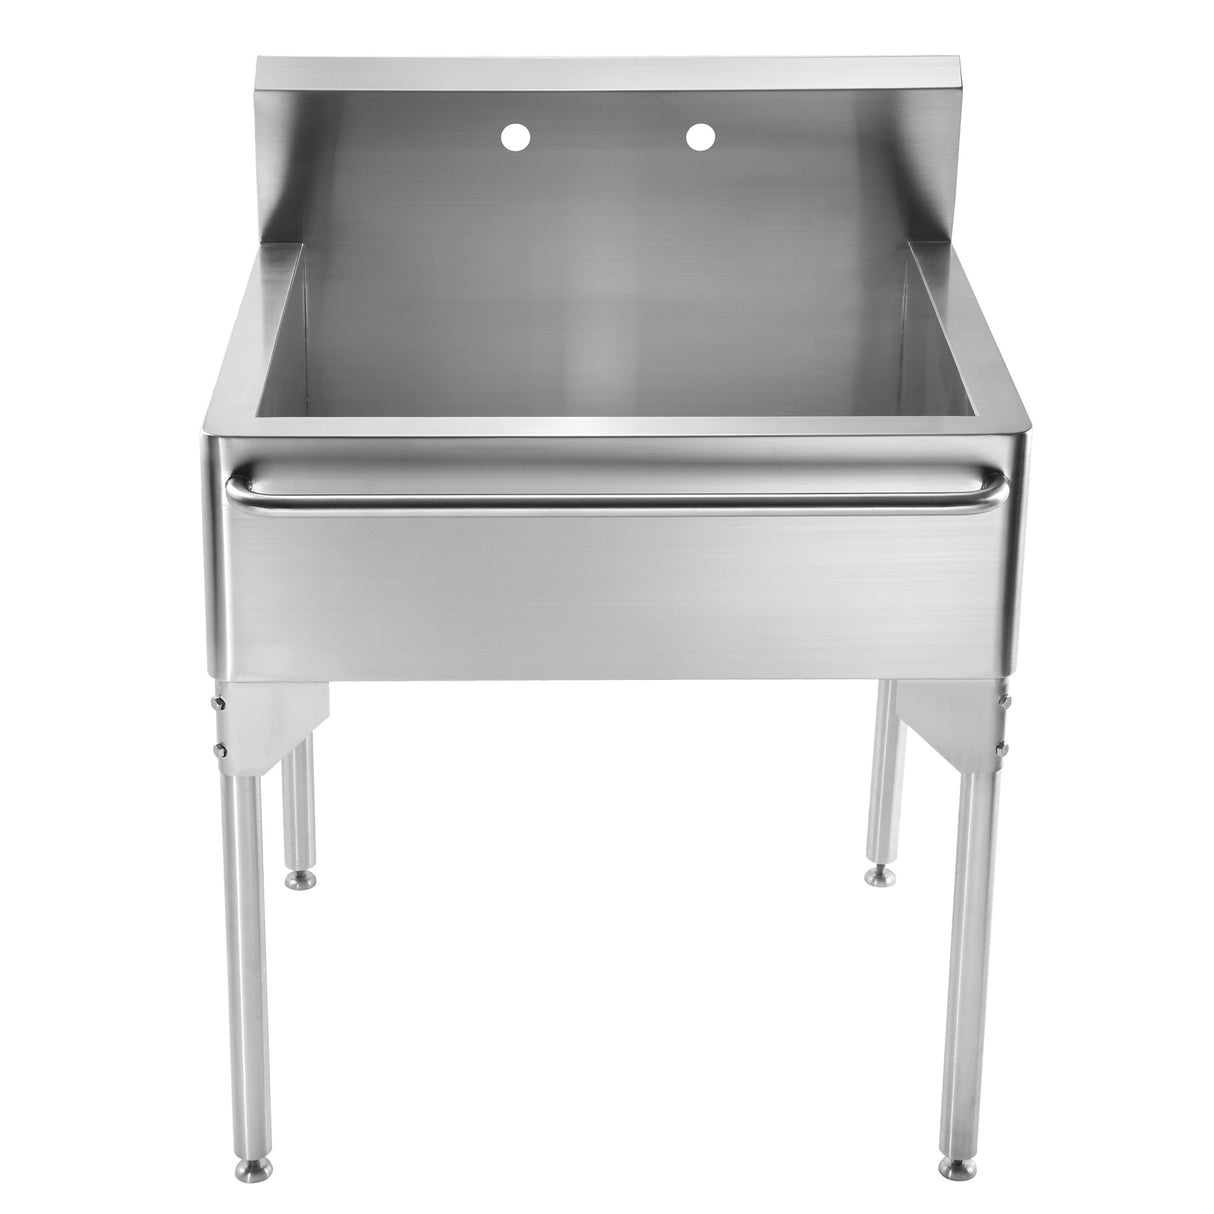 Pearlhaus Brushed Stainless Steel Single Bowl Commerical Freestanding Utility Sink with Towel Bar